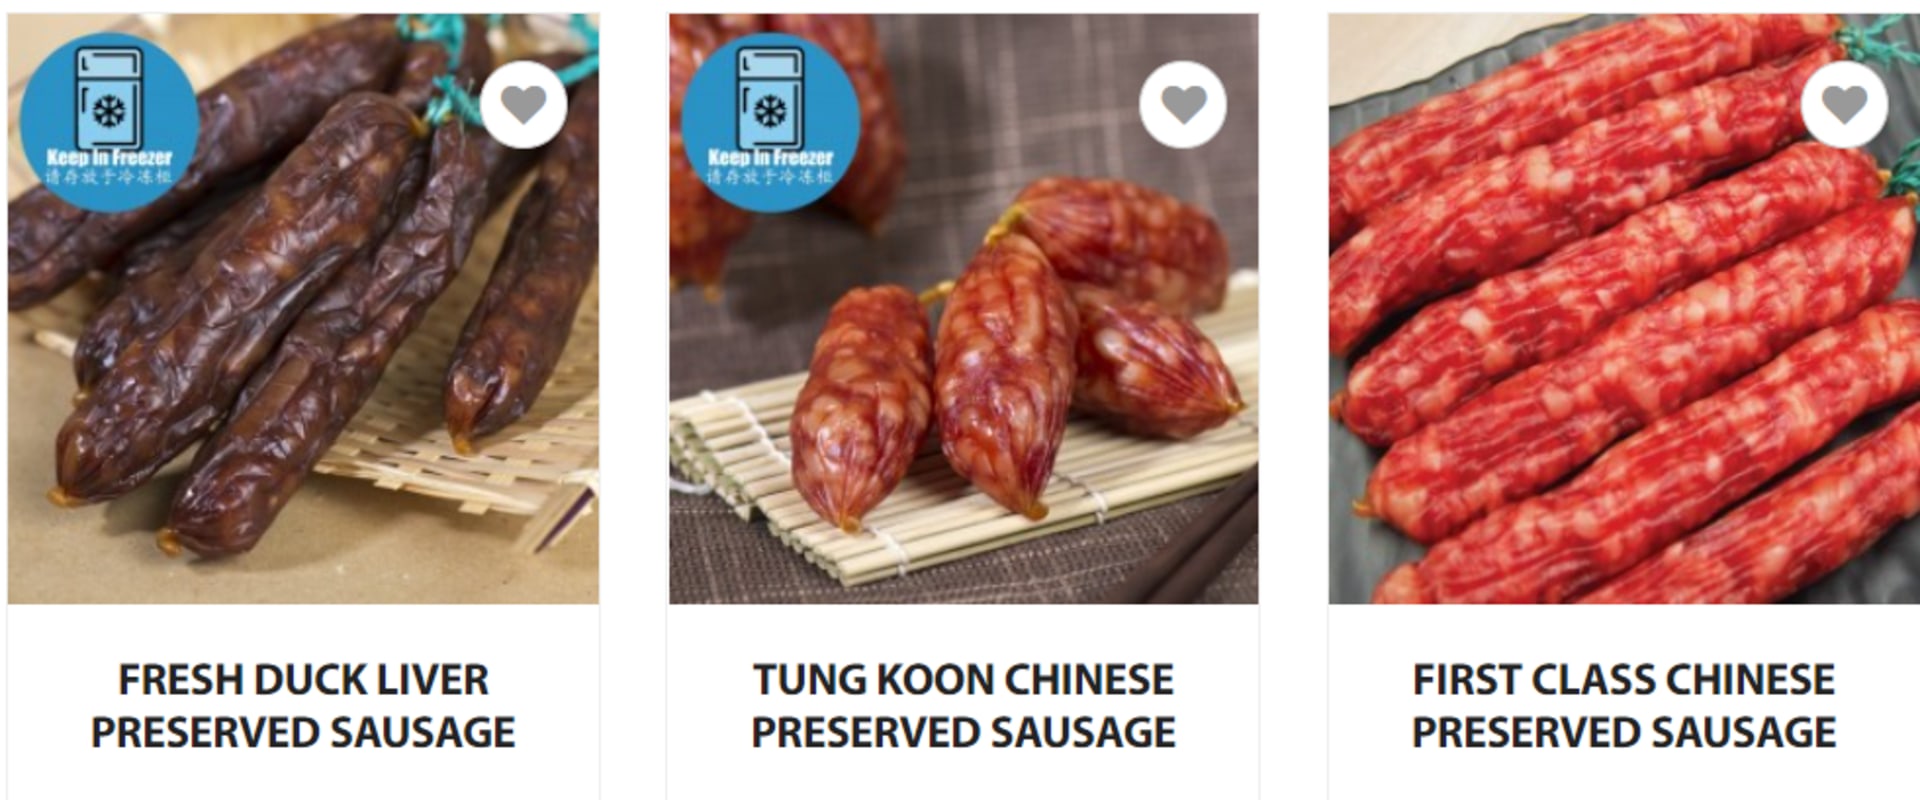 What is chinese sausage made of?